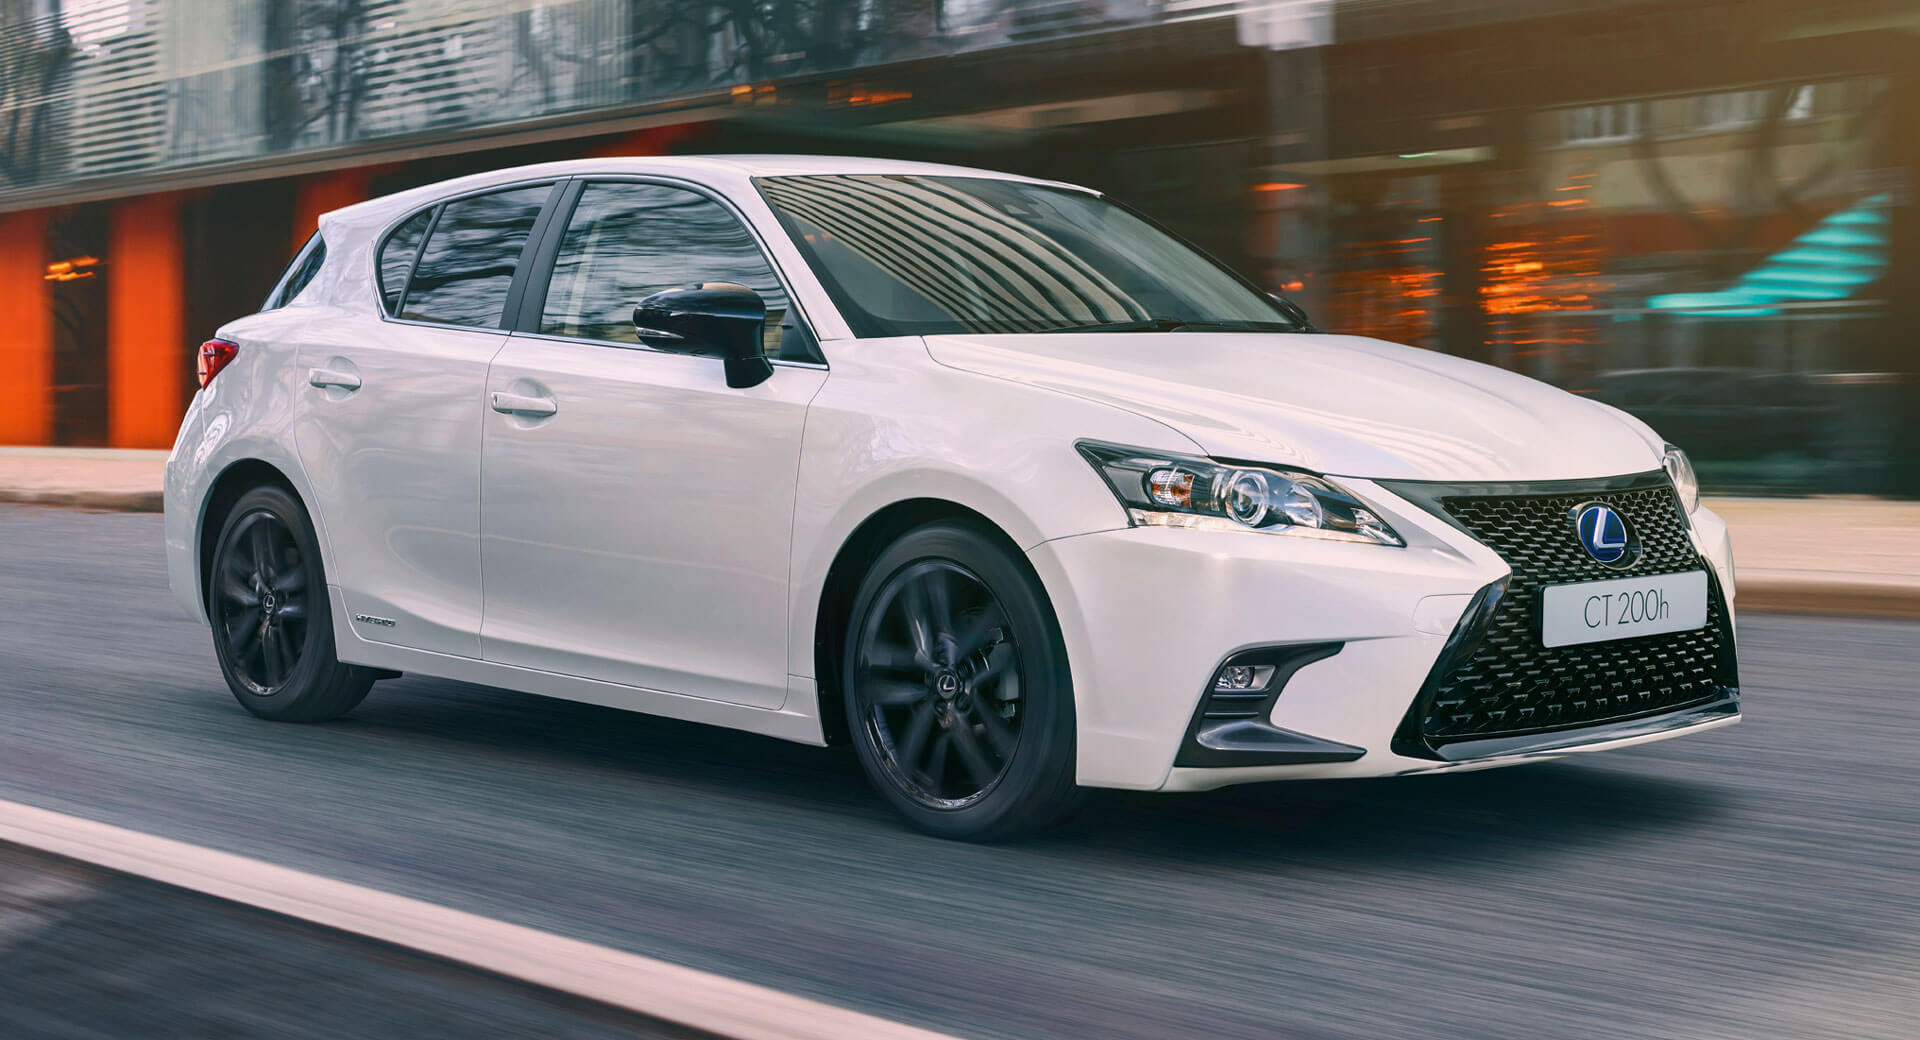 19 Lexus Ct 0h Arrives With New Grades And Specifications Carscoops